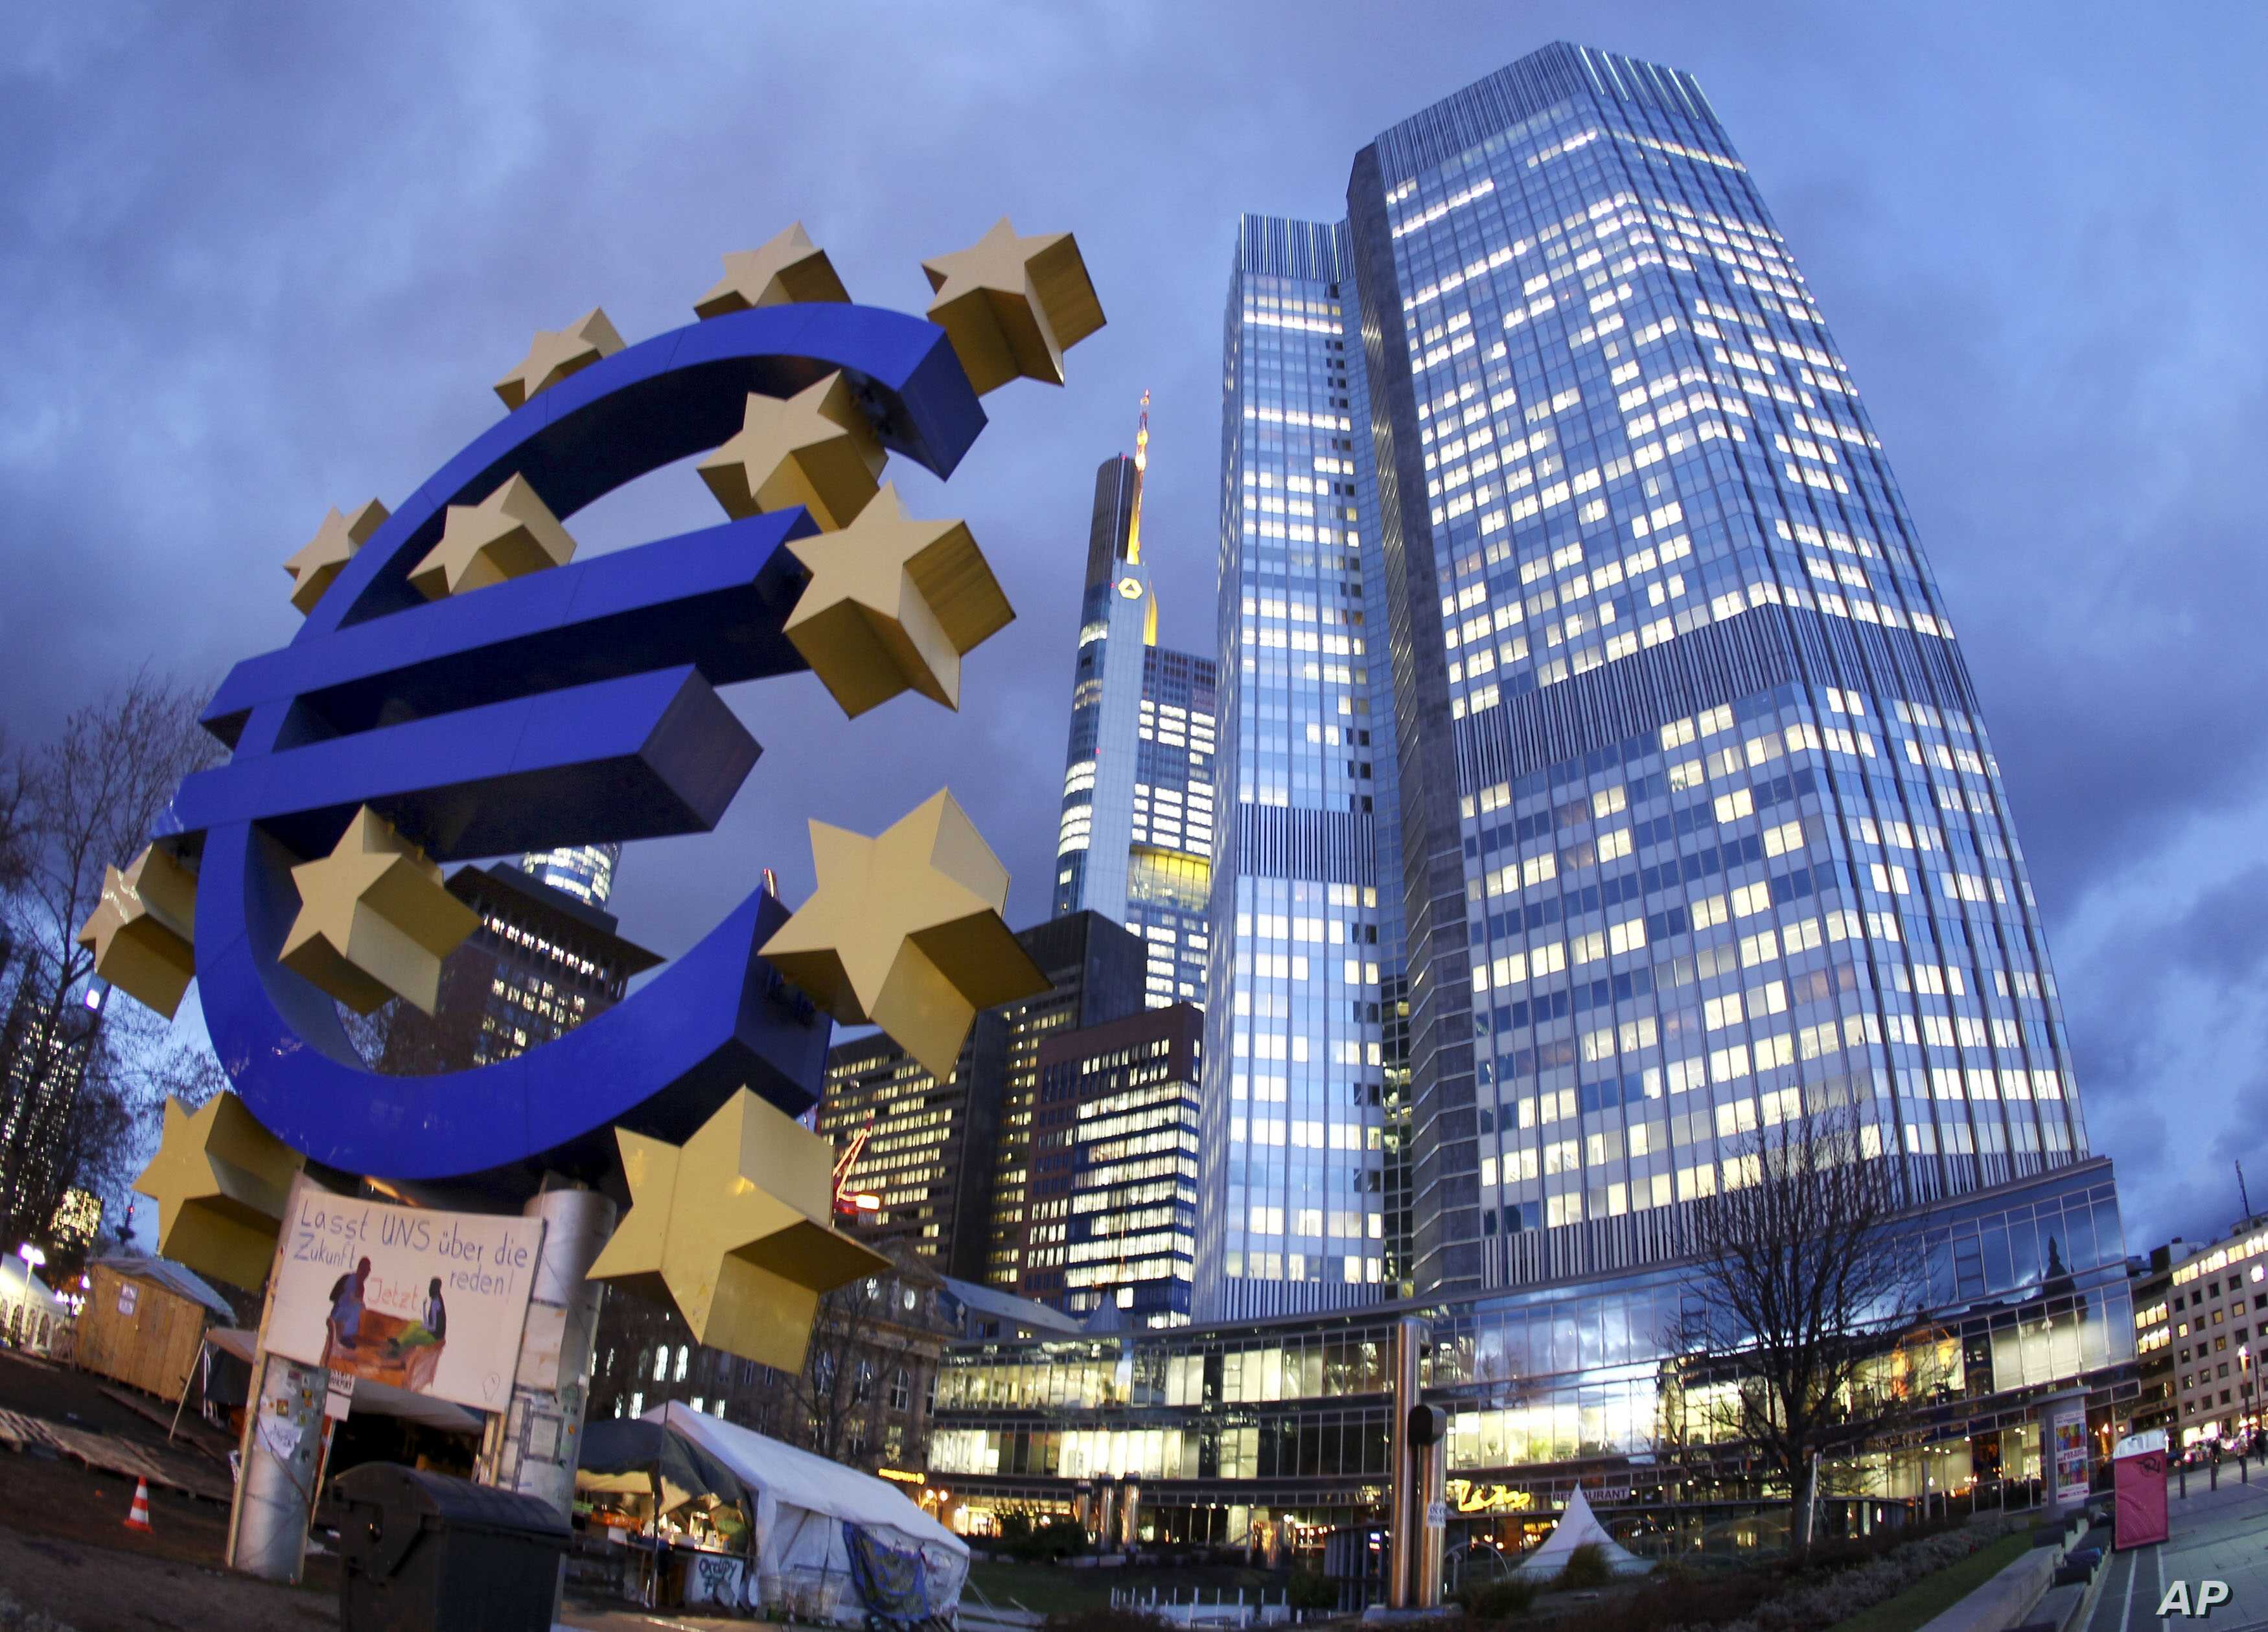 The European Central Bank has worsened the short-term outlook for the economy